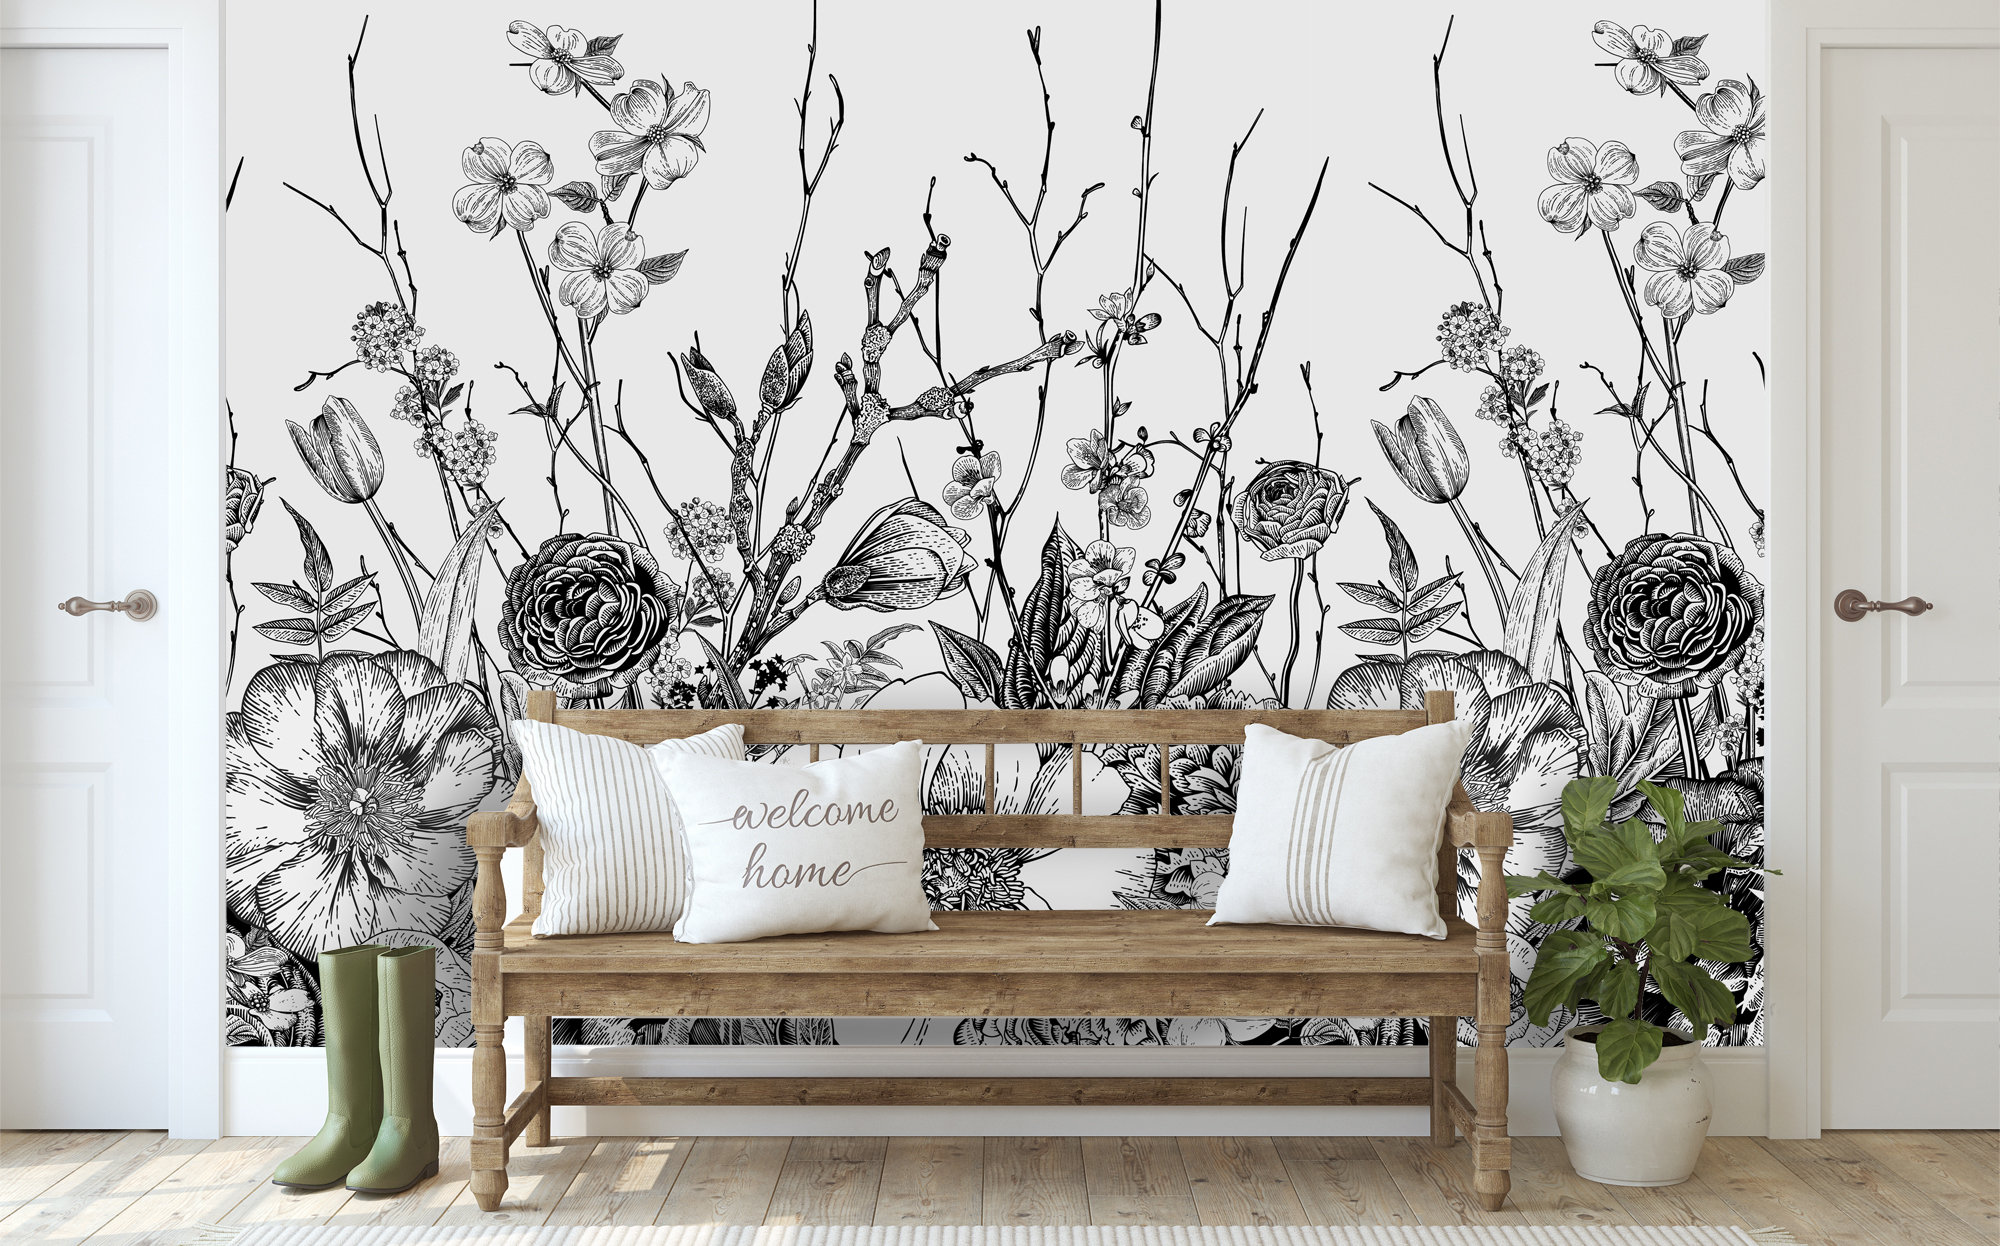  Retro Hand-Painted Ink Landscape Flowers Wall Mural, Modern  Black Watercolor Plant Photo Murals, Silk Material Easy to Clean Panoramic  Mural for Bedroom Hotel Yoga Studio - 158W x 110H : Tools